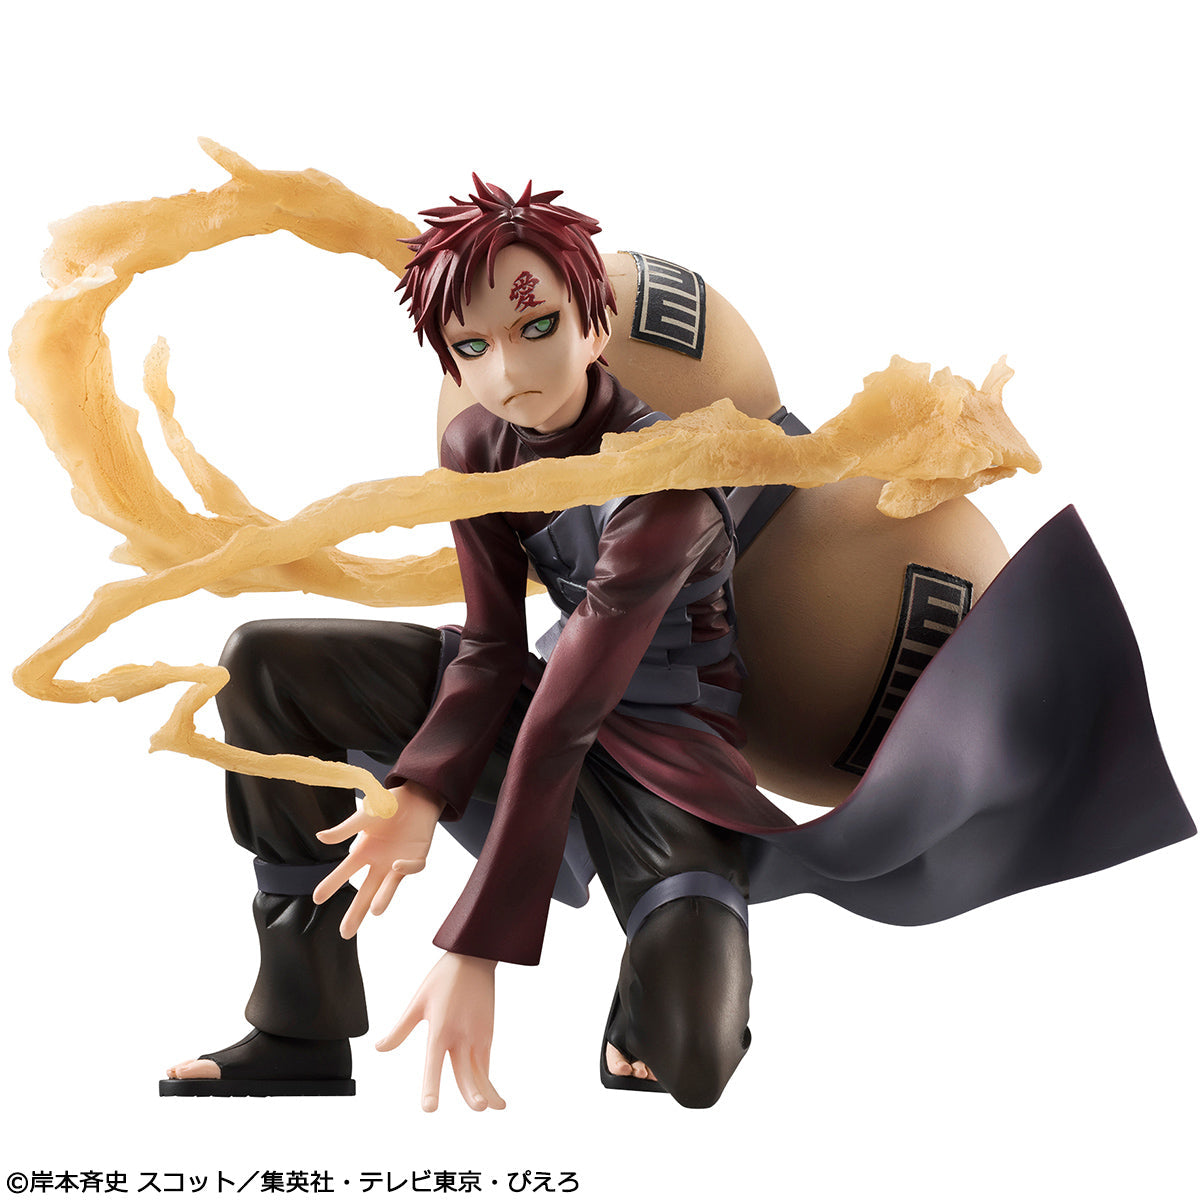 Naruto Shippuden - Gaara - G.E.M. - 1/8 - 2021 Re-release (MegaHouse) [Shop Exclusive], Franchise: Naruto Shippuden, Brand: MegaHouse, Release Date: 28. Oct 2021, Type: General, Nippon Figures